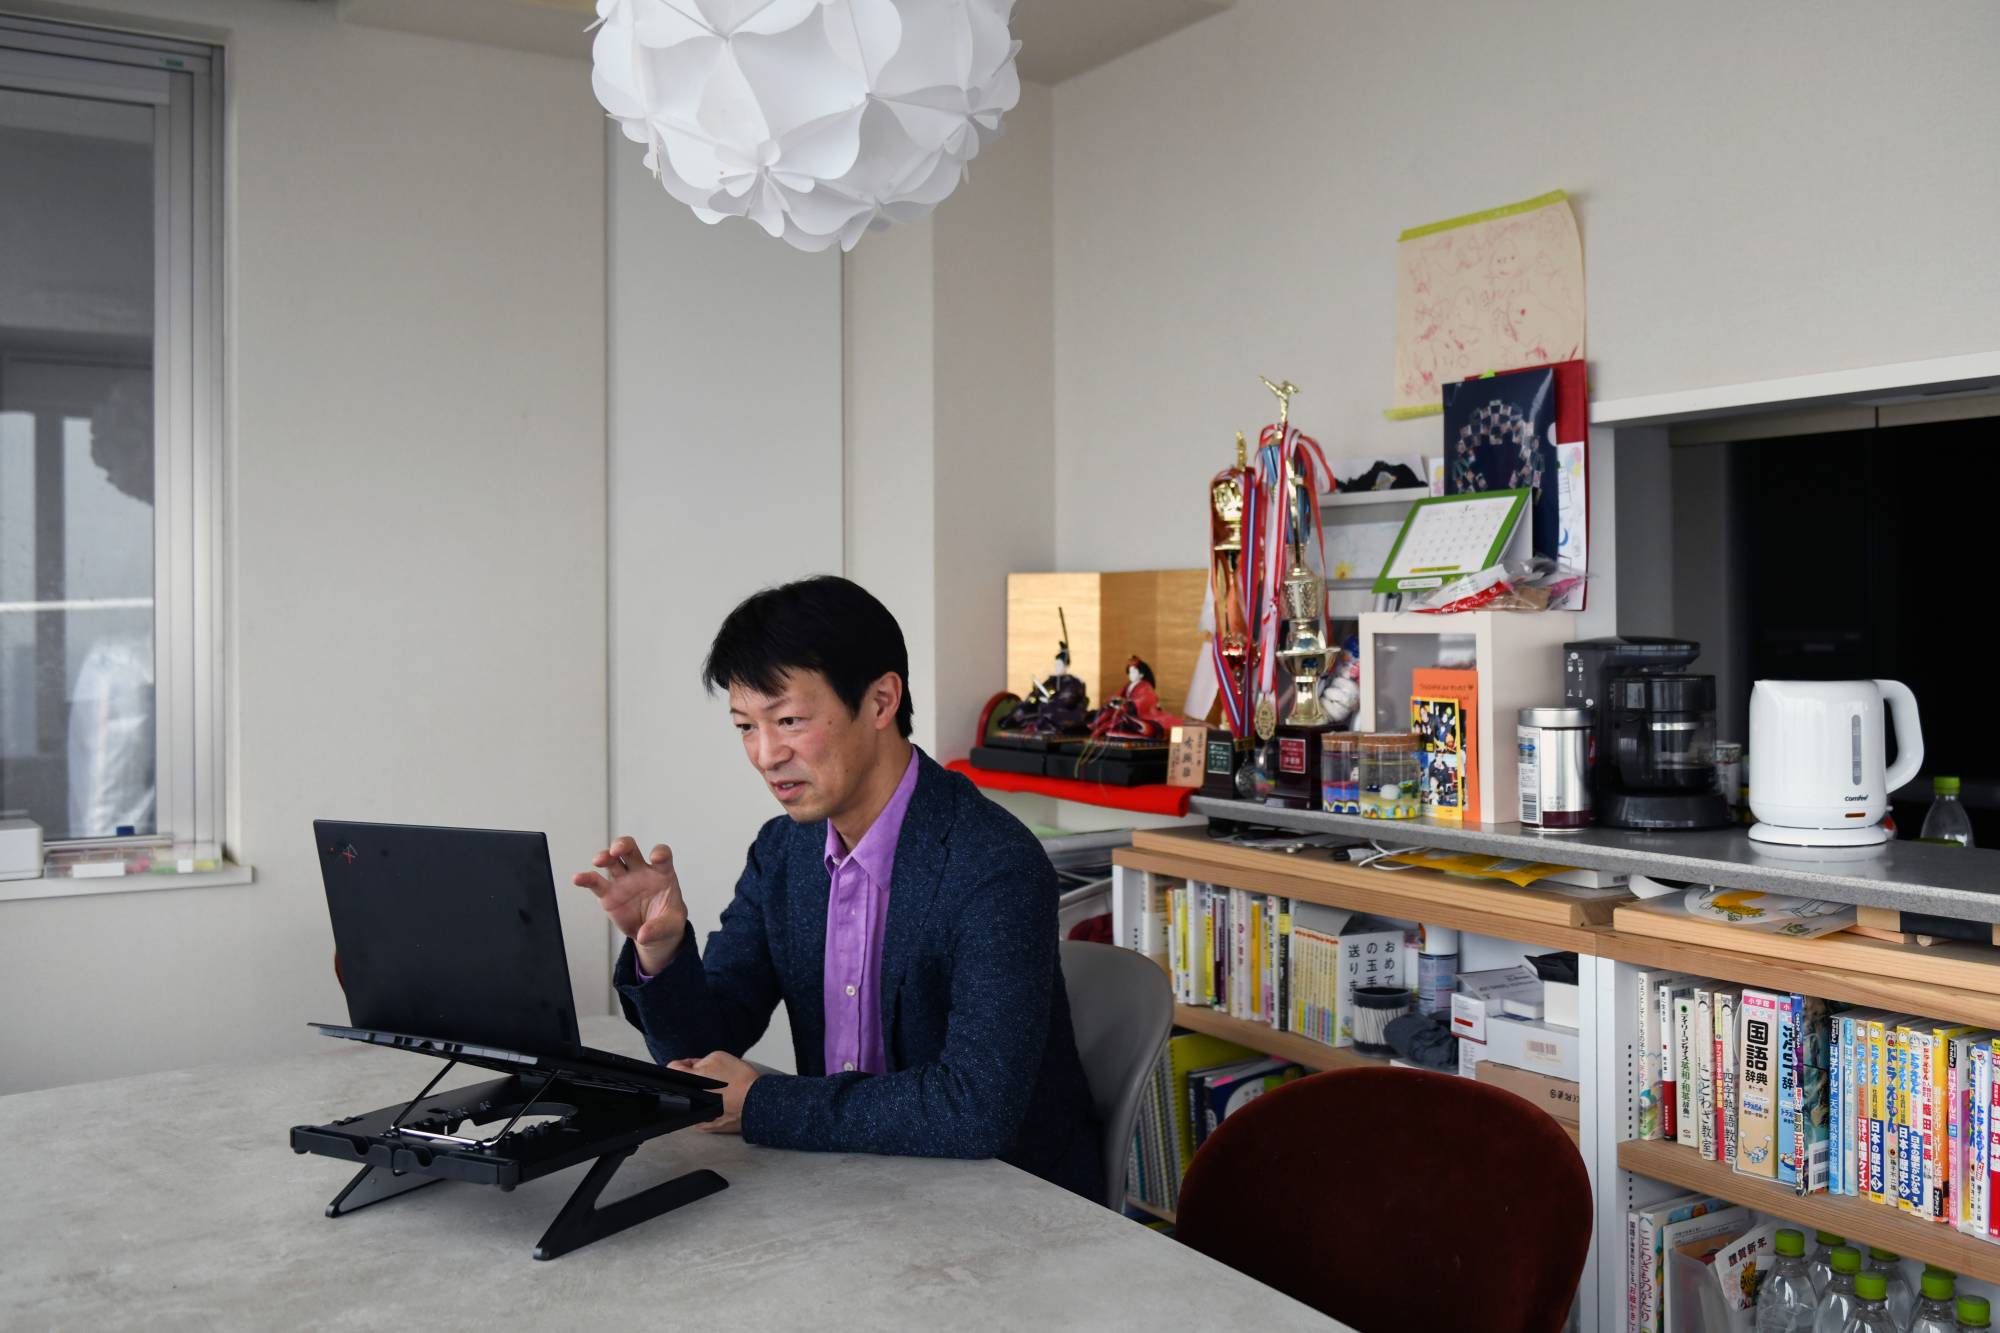 Takahiro Harada meets remotely with a client from his home in Tokyo on April 3. Harada took early retirement and started his own personal coaching business.  | NORIKO HAYASHI/THE NEW YORK TIMES